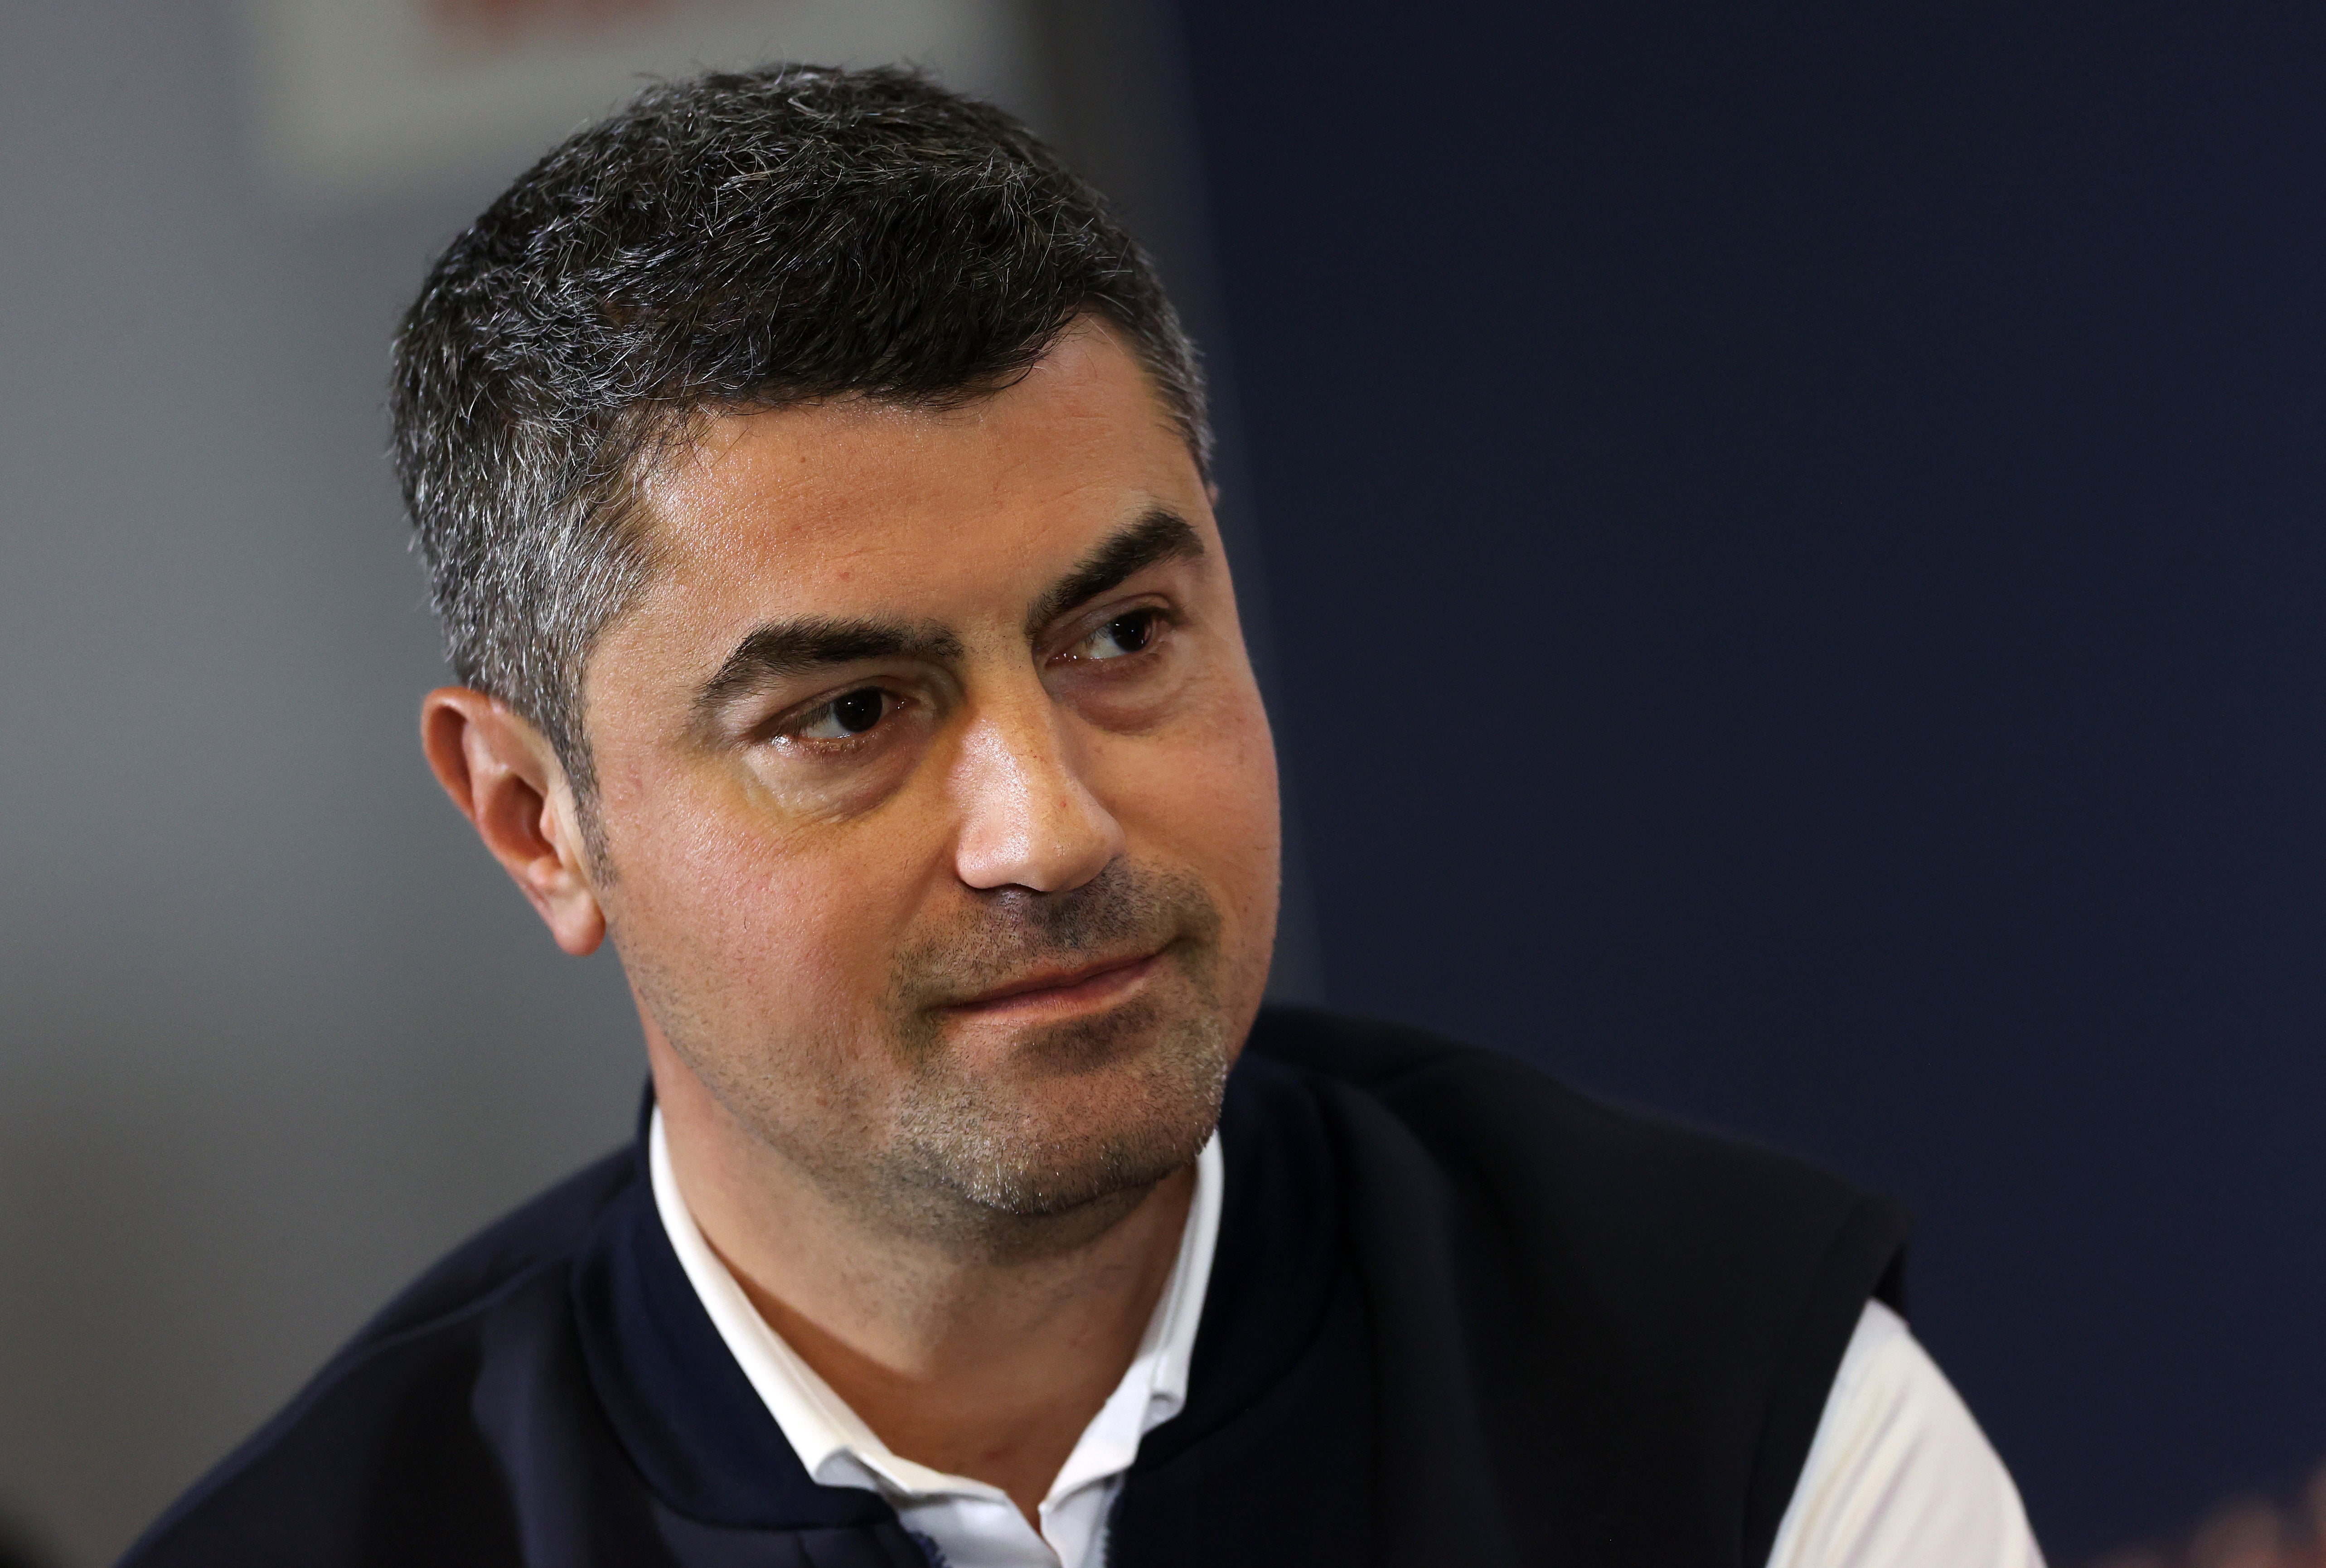 Michael Masi has been ousted as F1’s race director